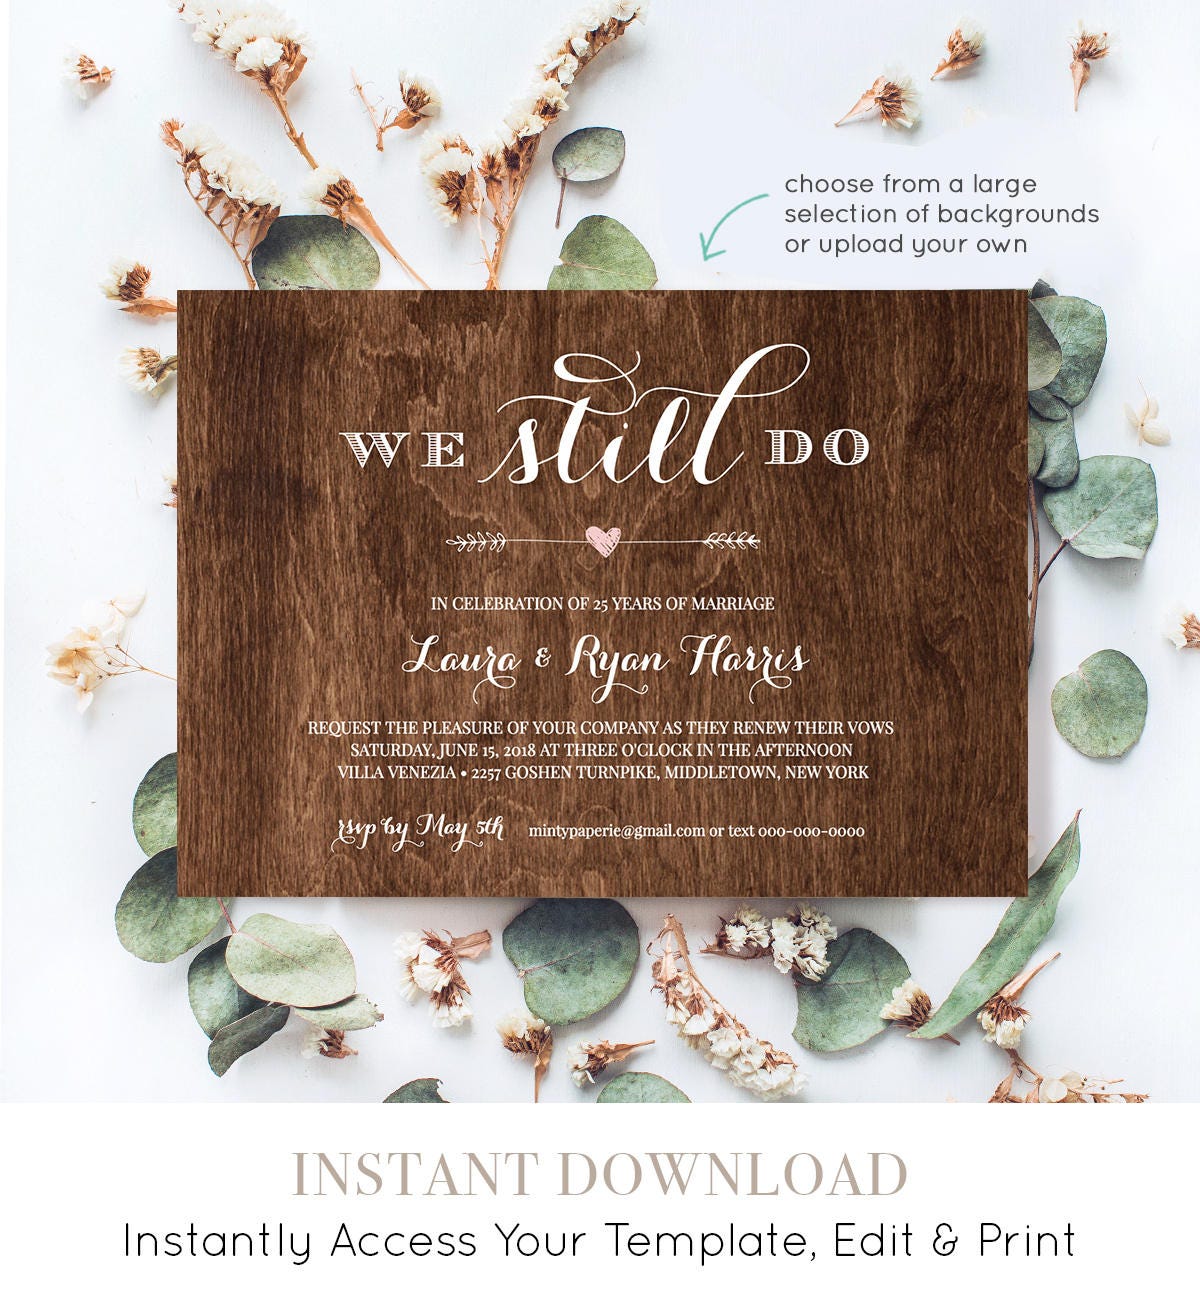 Vow Renewal Invitation Template We Still Do Instant Download Wedding Anniversary Renew Vows 